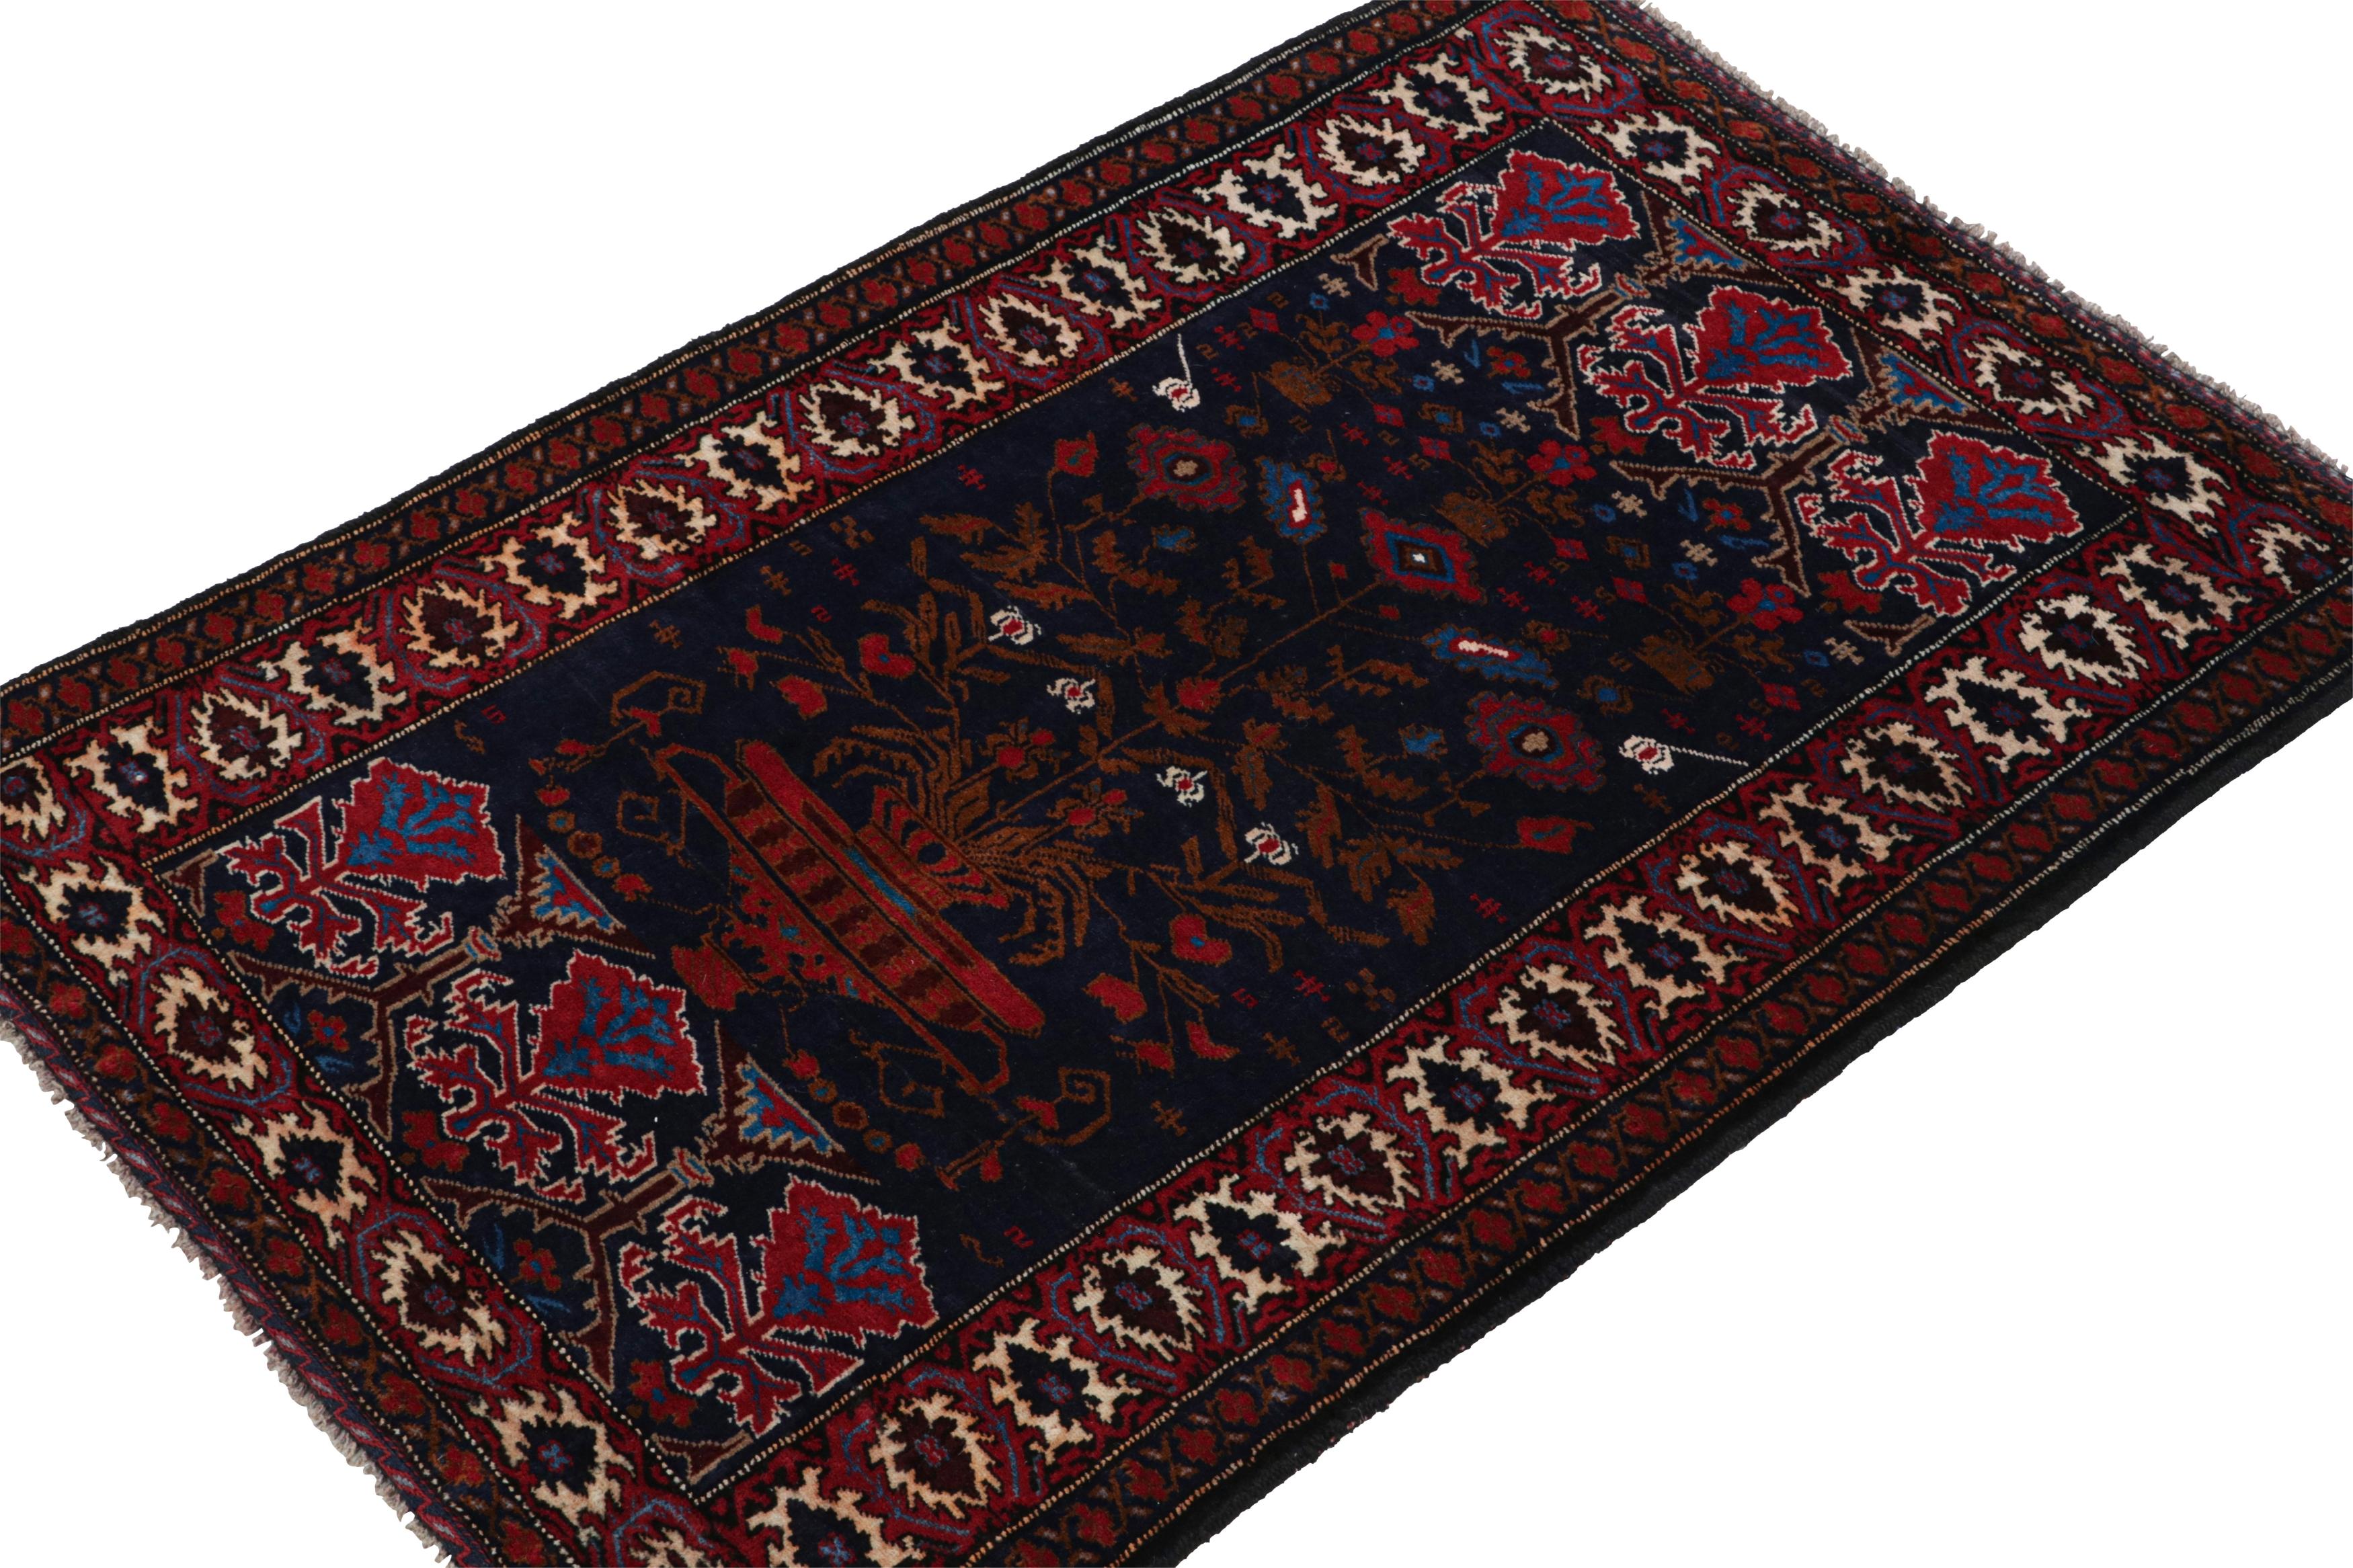 Hand-knotted in wool, this 3x4 Baluch Persian rug of the 1950s is the latest to enter Rug & Kilim’s prestigious Antique & Vintage collection.

On the Design: 

This Baluch rug takes after fine Persian aesthetics with a flower vase pictorial in red &